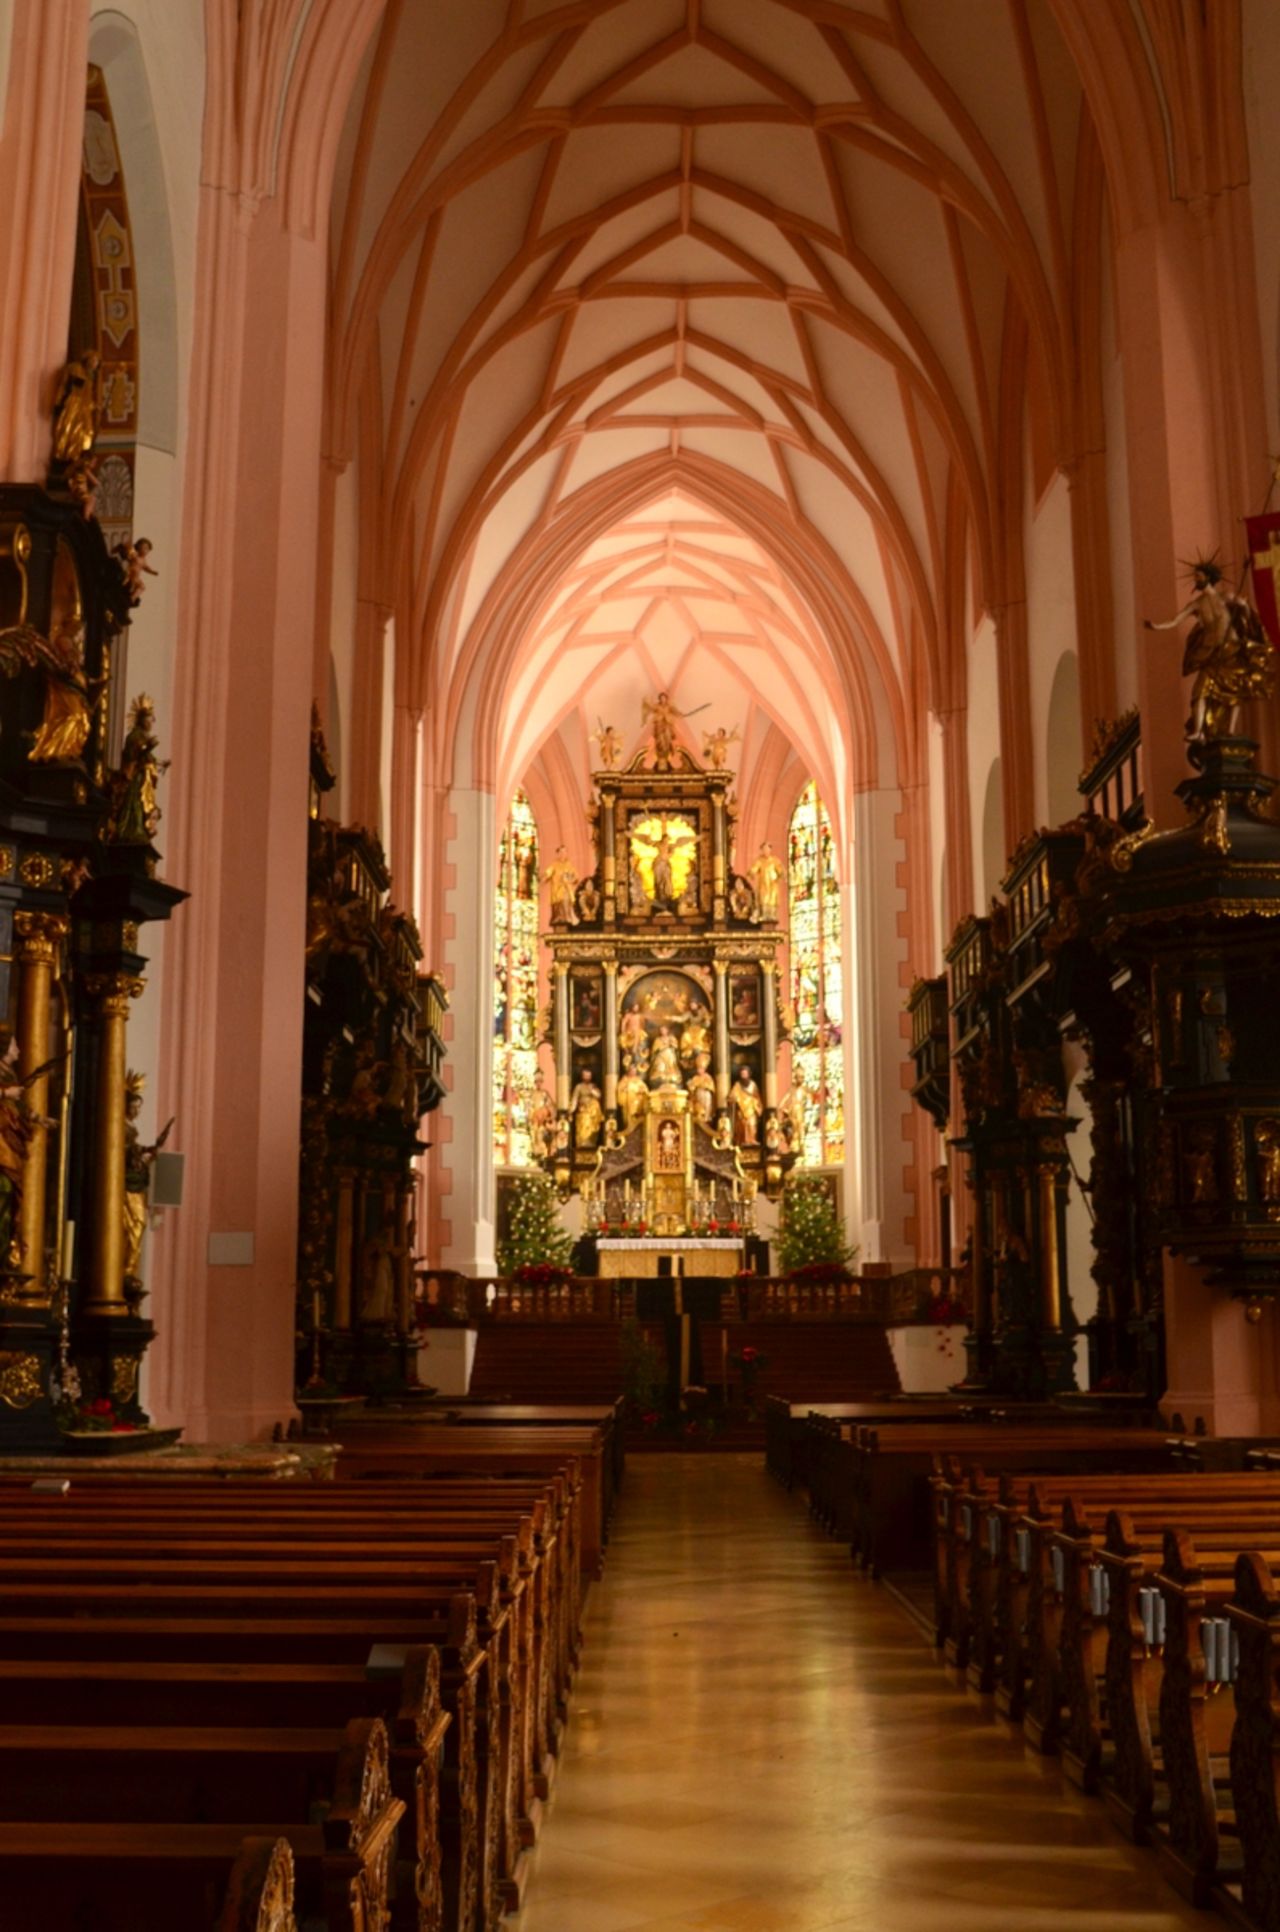 The wedding between Maria and Captain von Trapp was filmed in a church in the town of Mondsee.